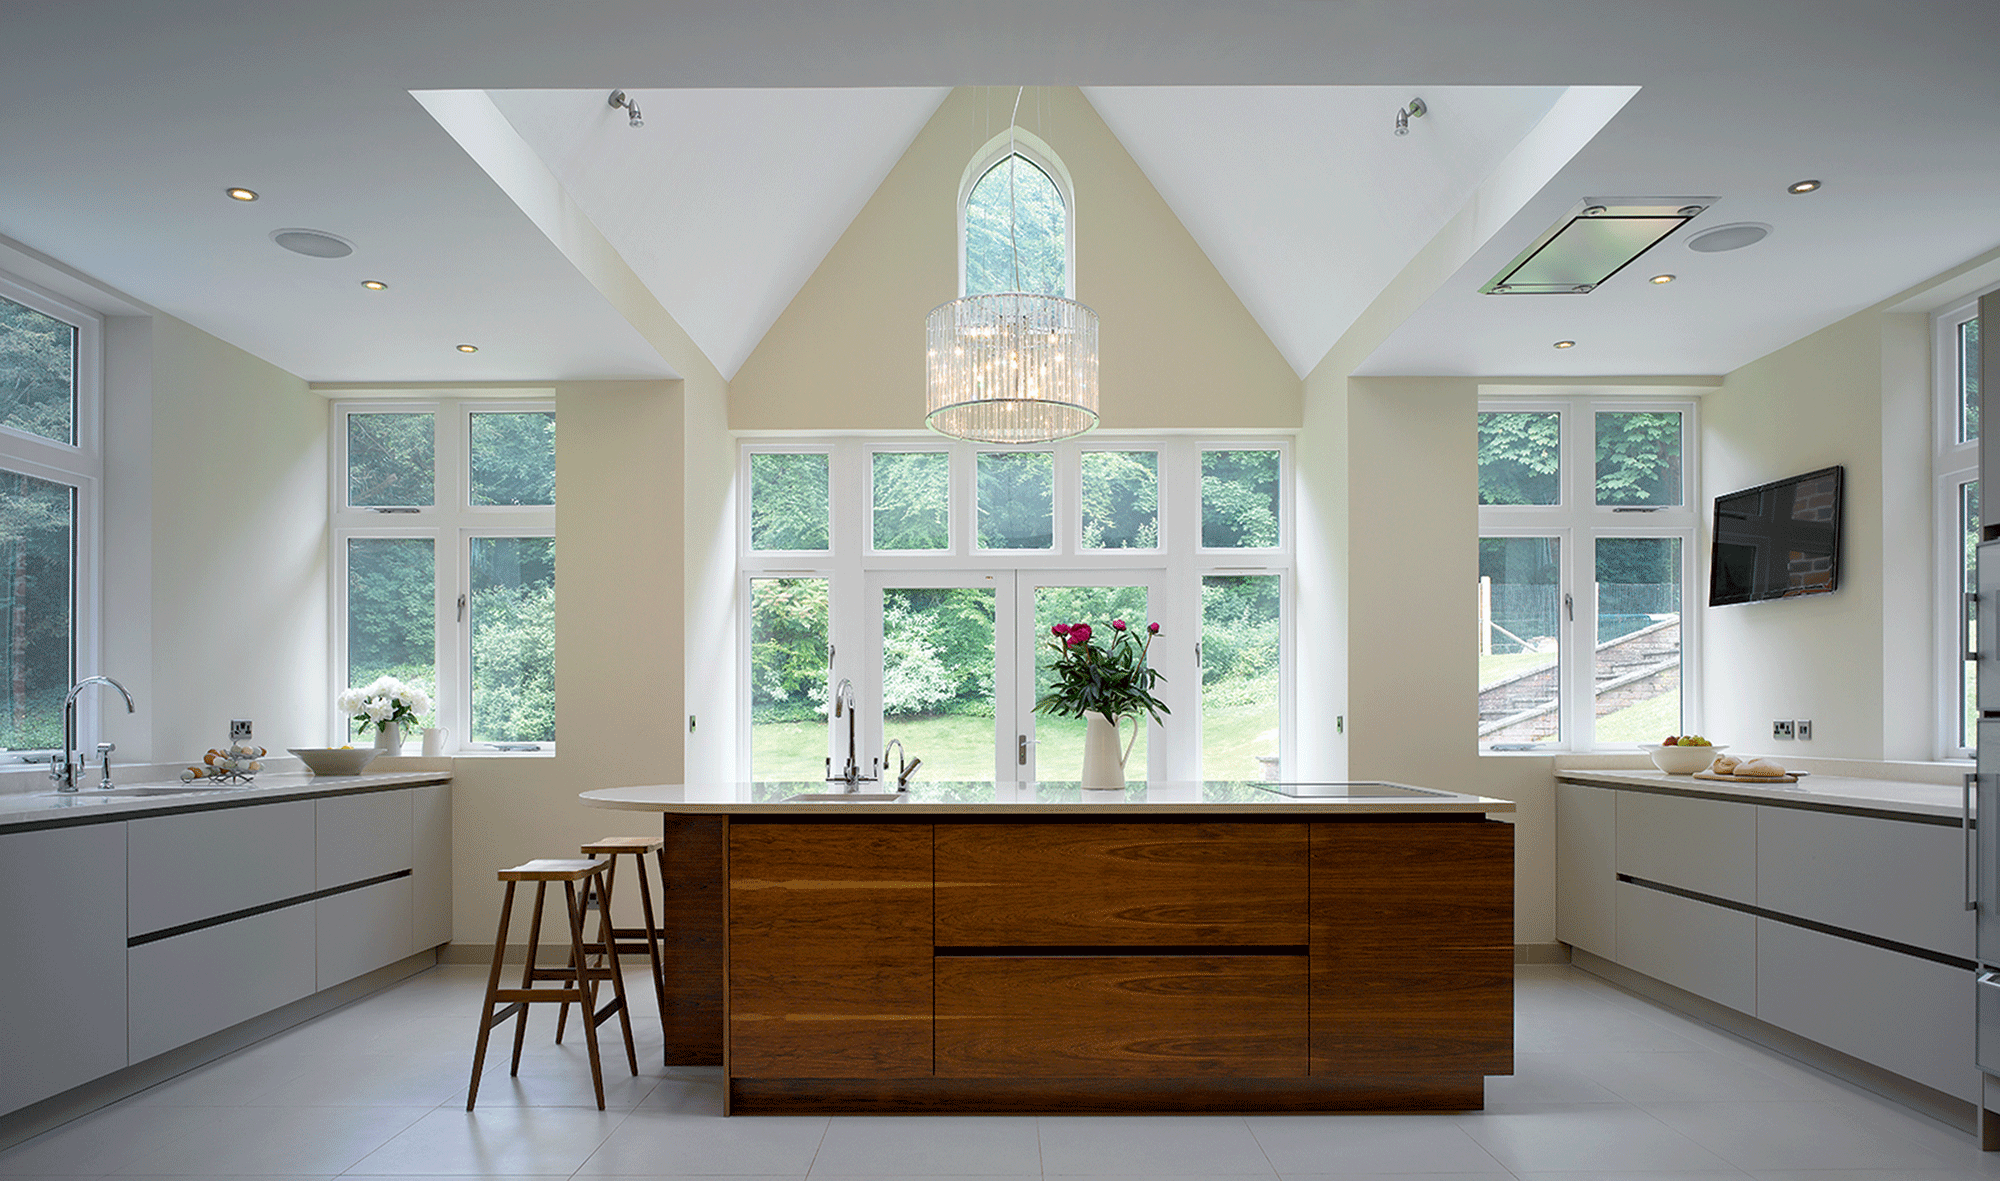 Extension to a Grade II listed old rectory by Witcher Crawford